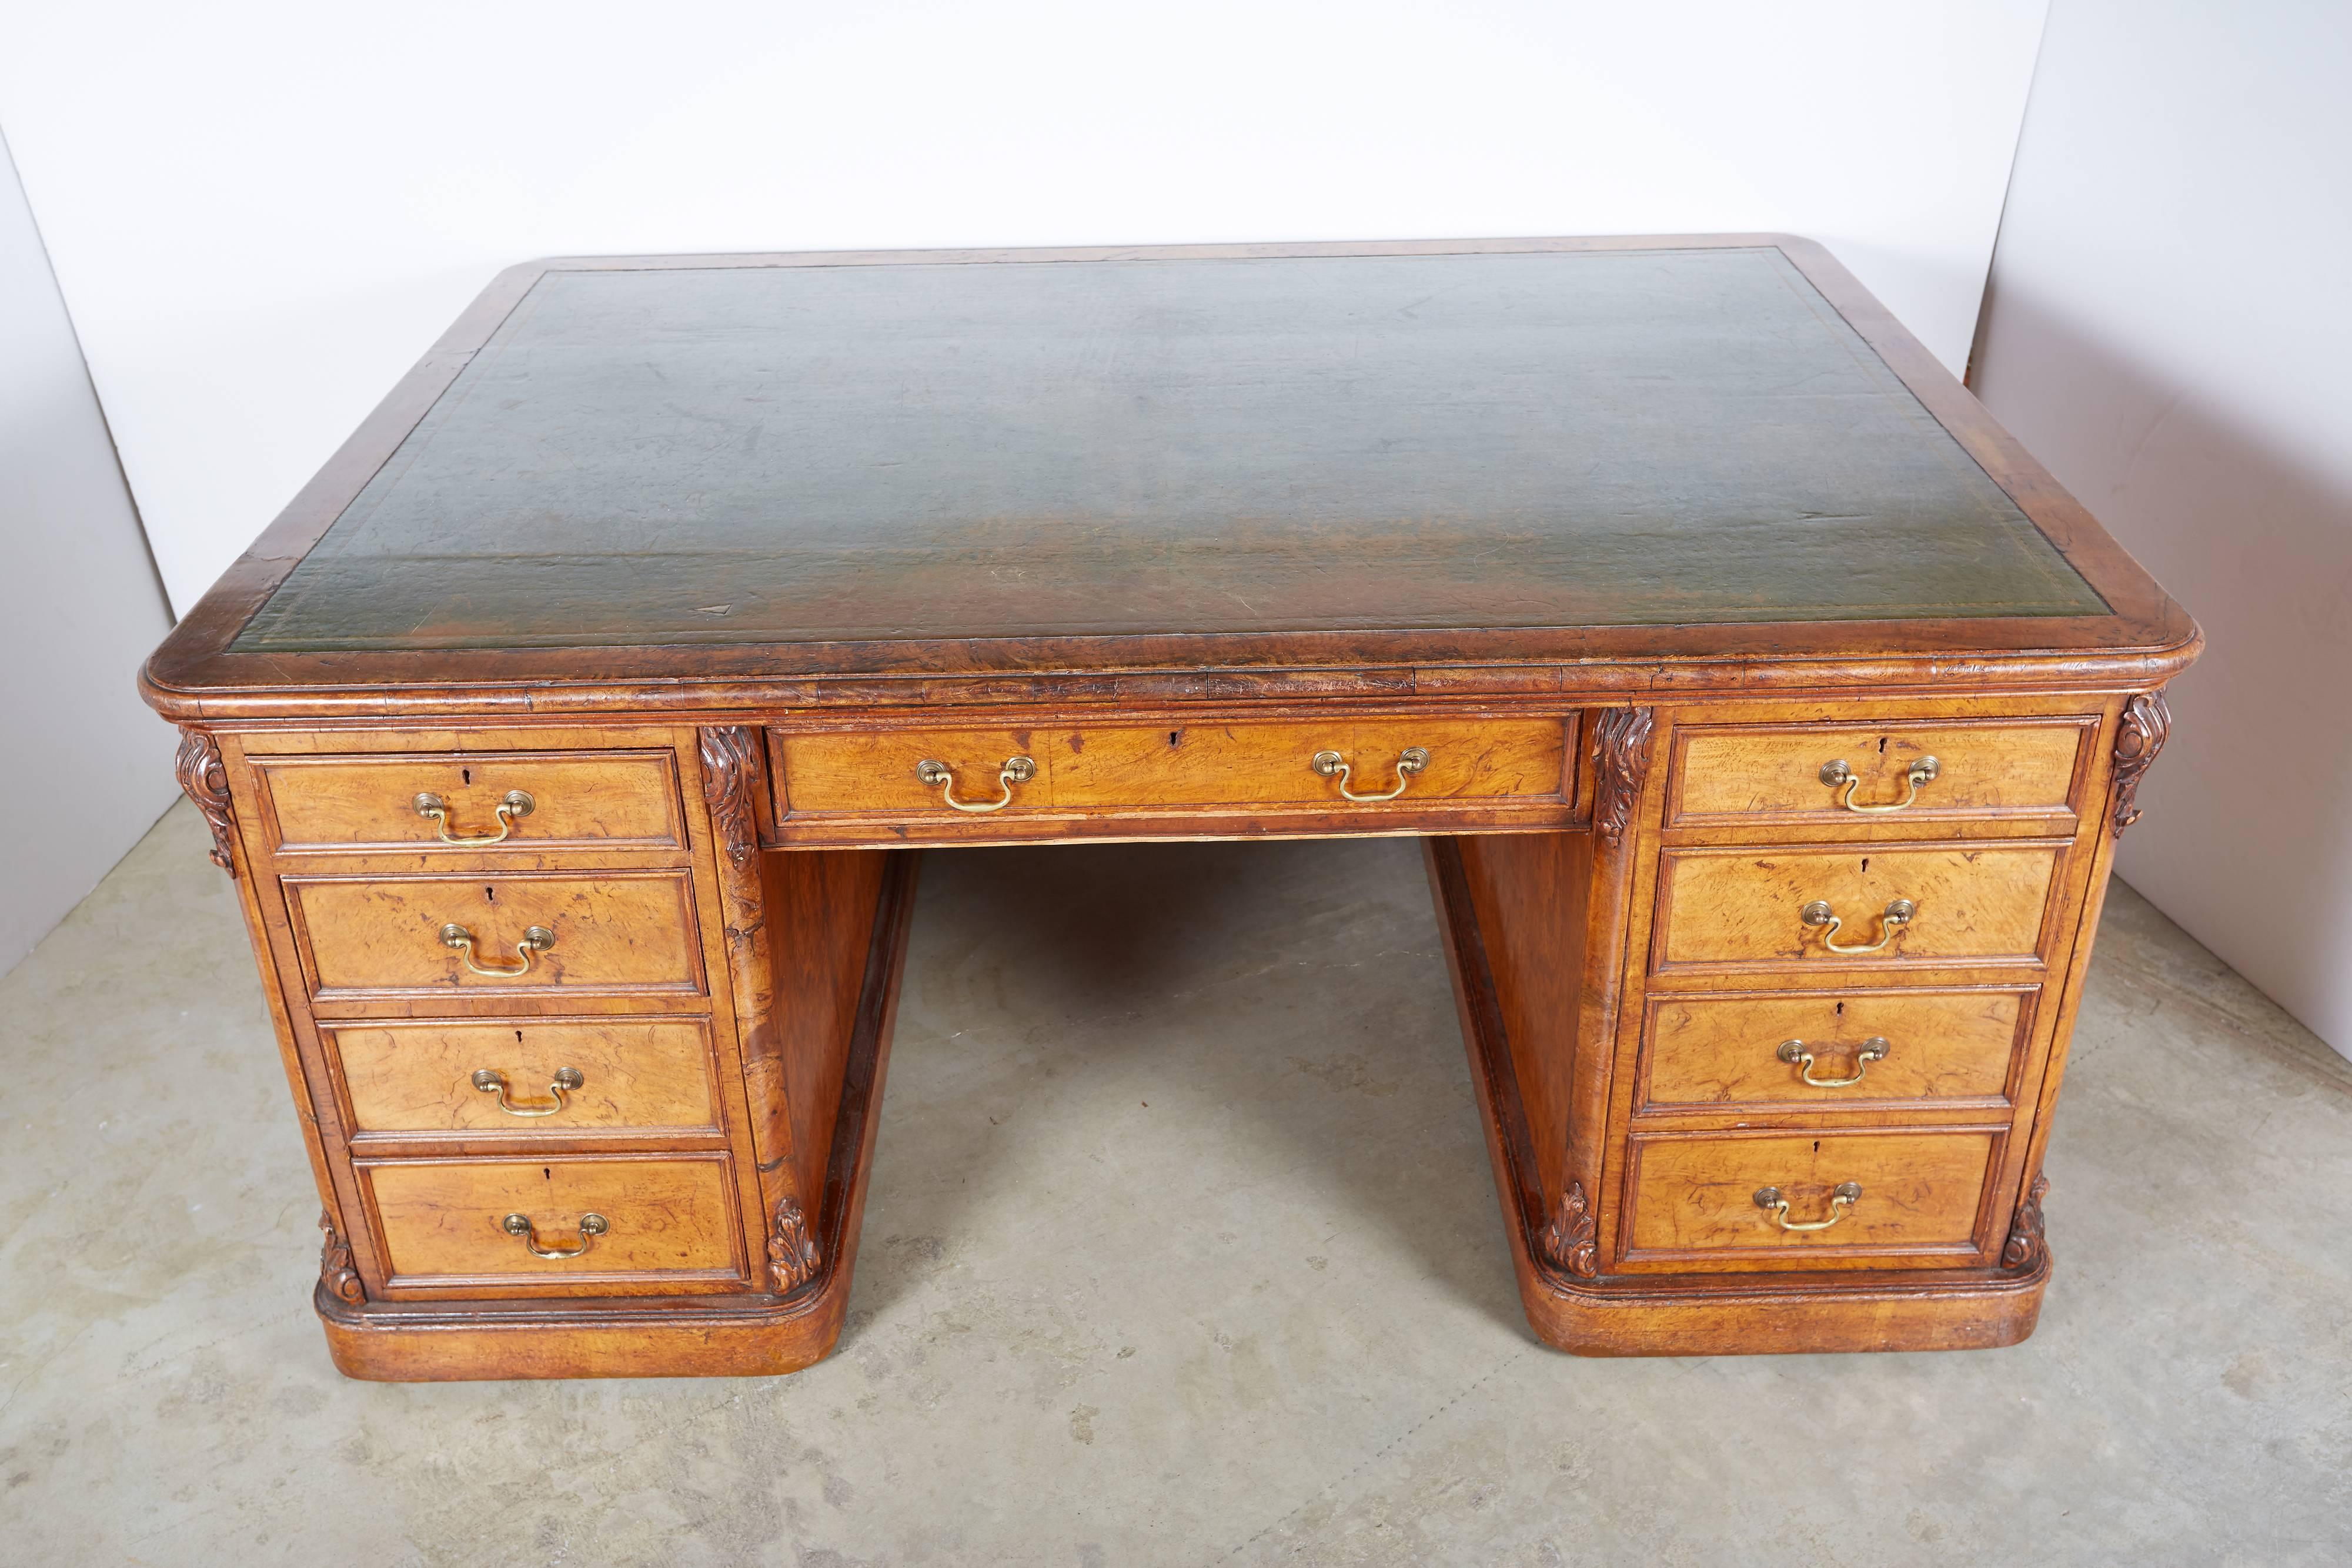 Early 19th century burl walnut double sided partners desk with a central drawer on both sides. One side is fitted with columns of drawers on either side of the central drawer and the other side is fitted with cupboards on either side of the center